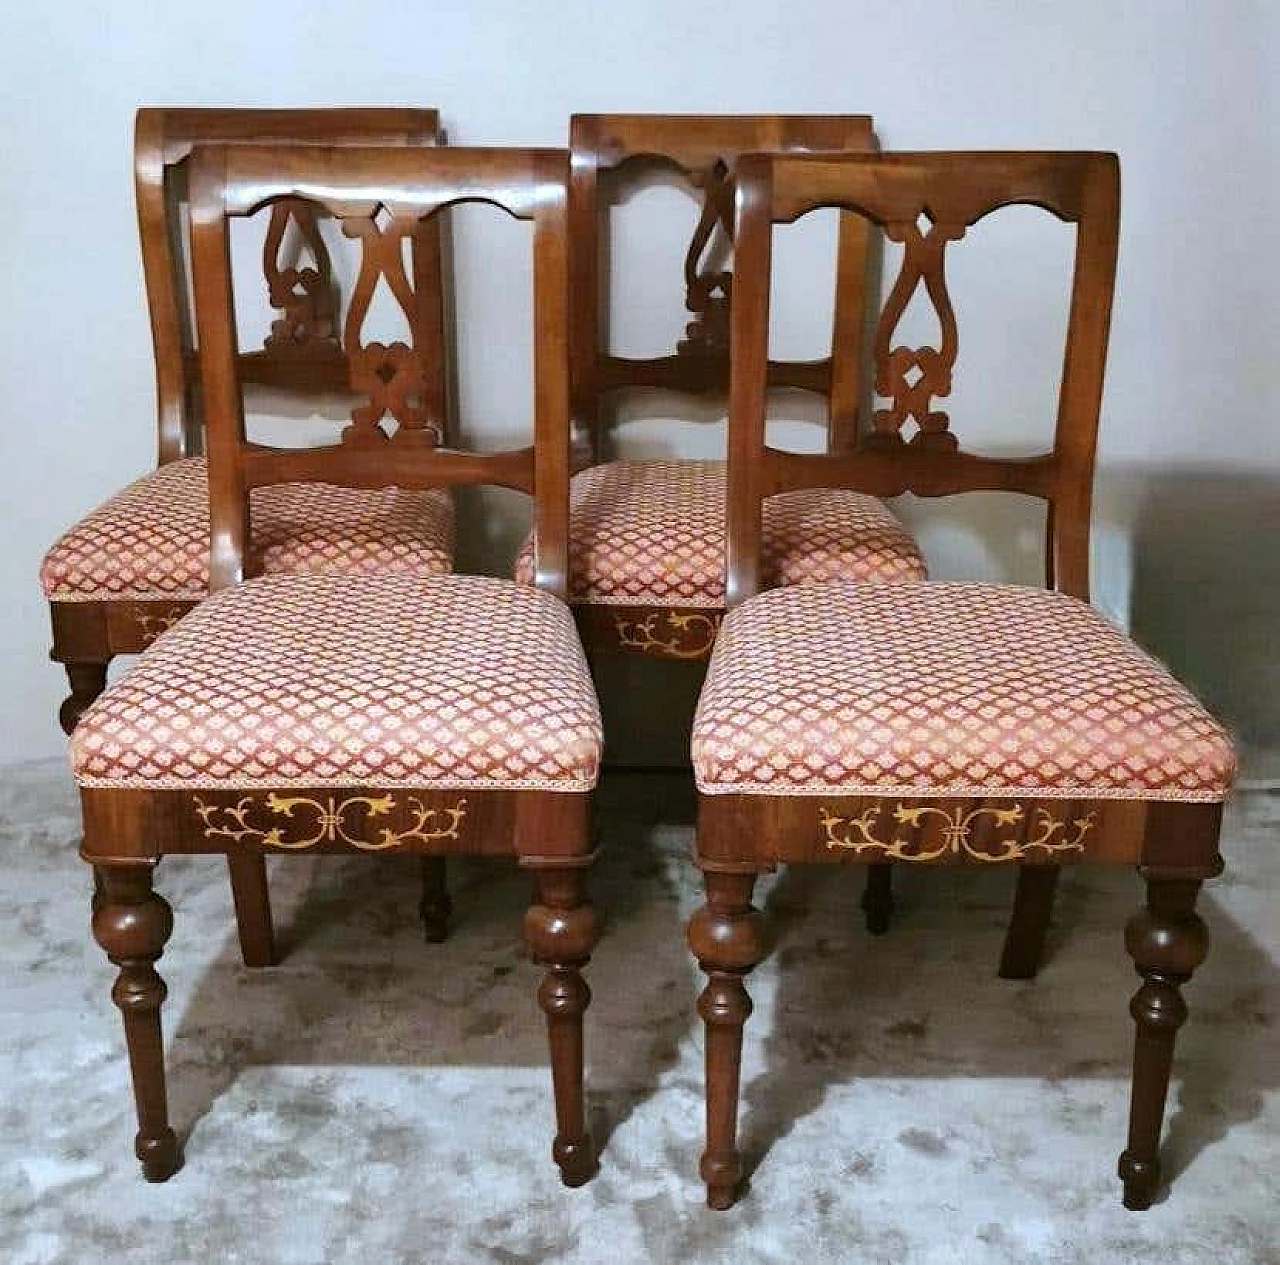 4 Biedermeier style wooden and fabric chairs, mid-19th century 5